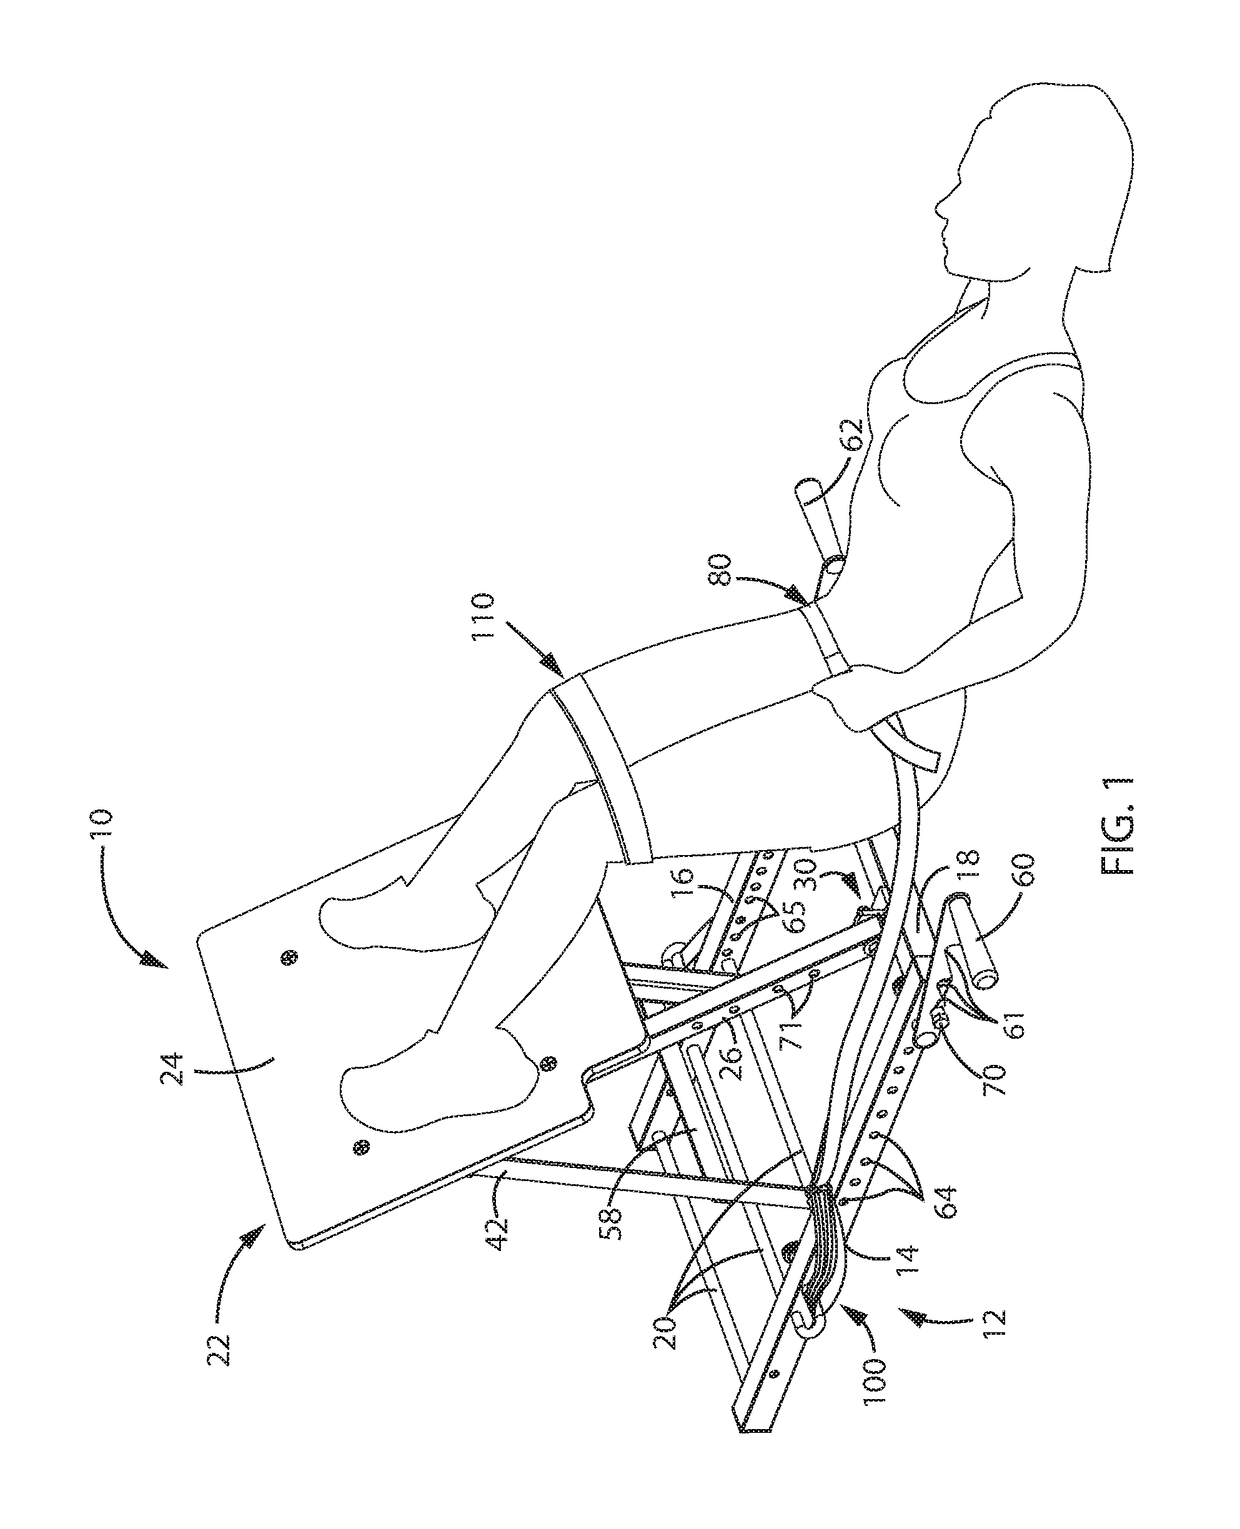 Fitness Training Equipment and Method of Use